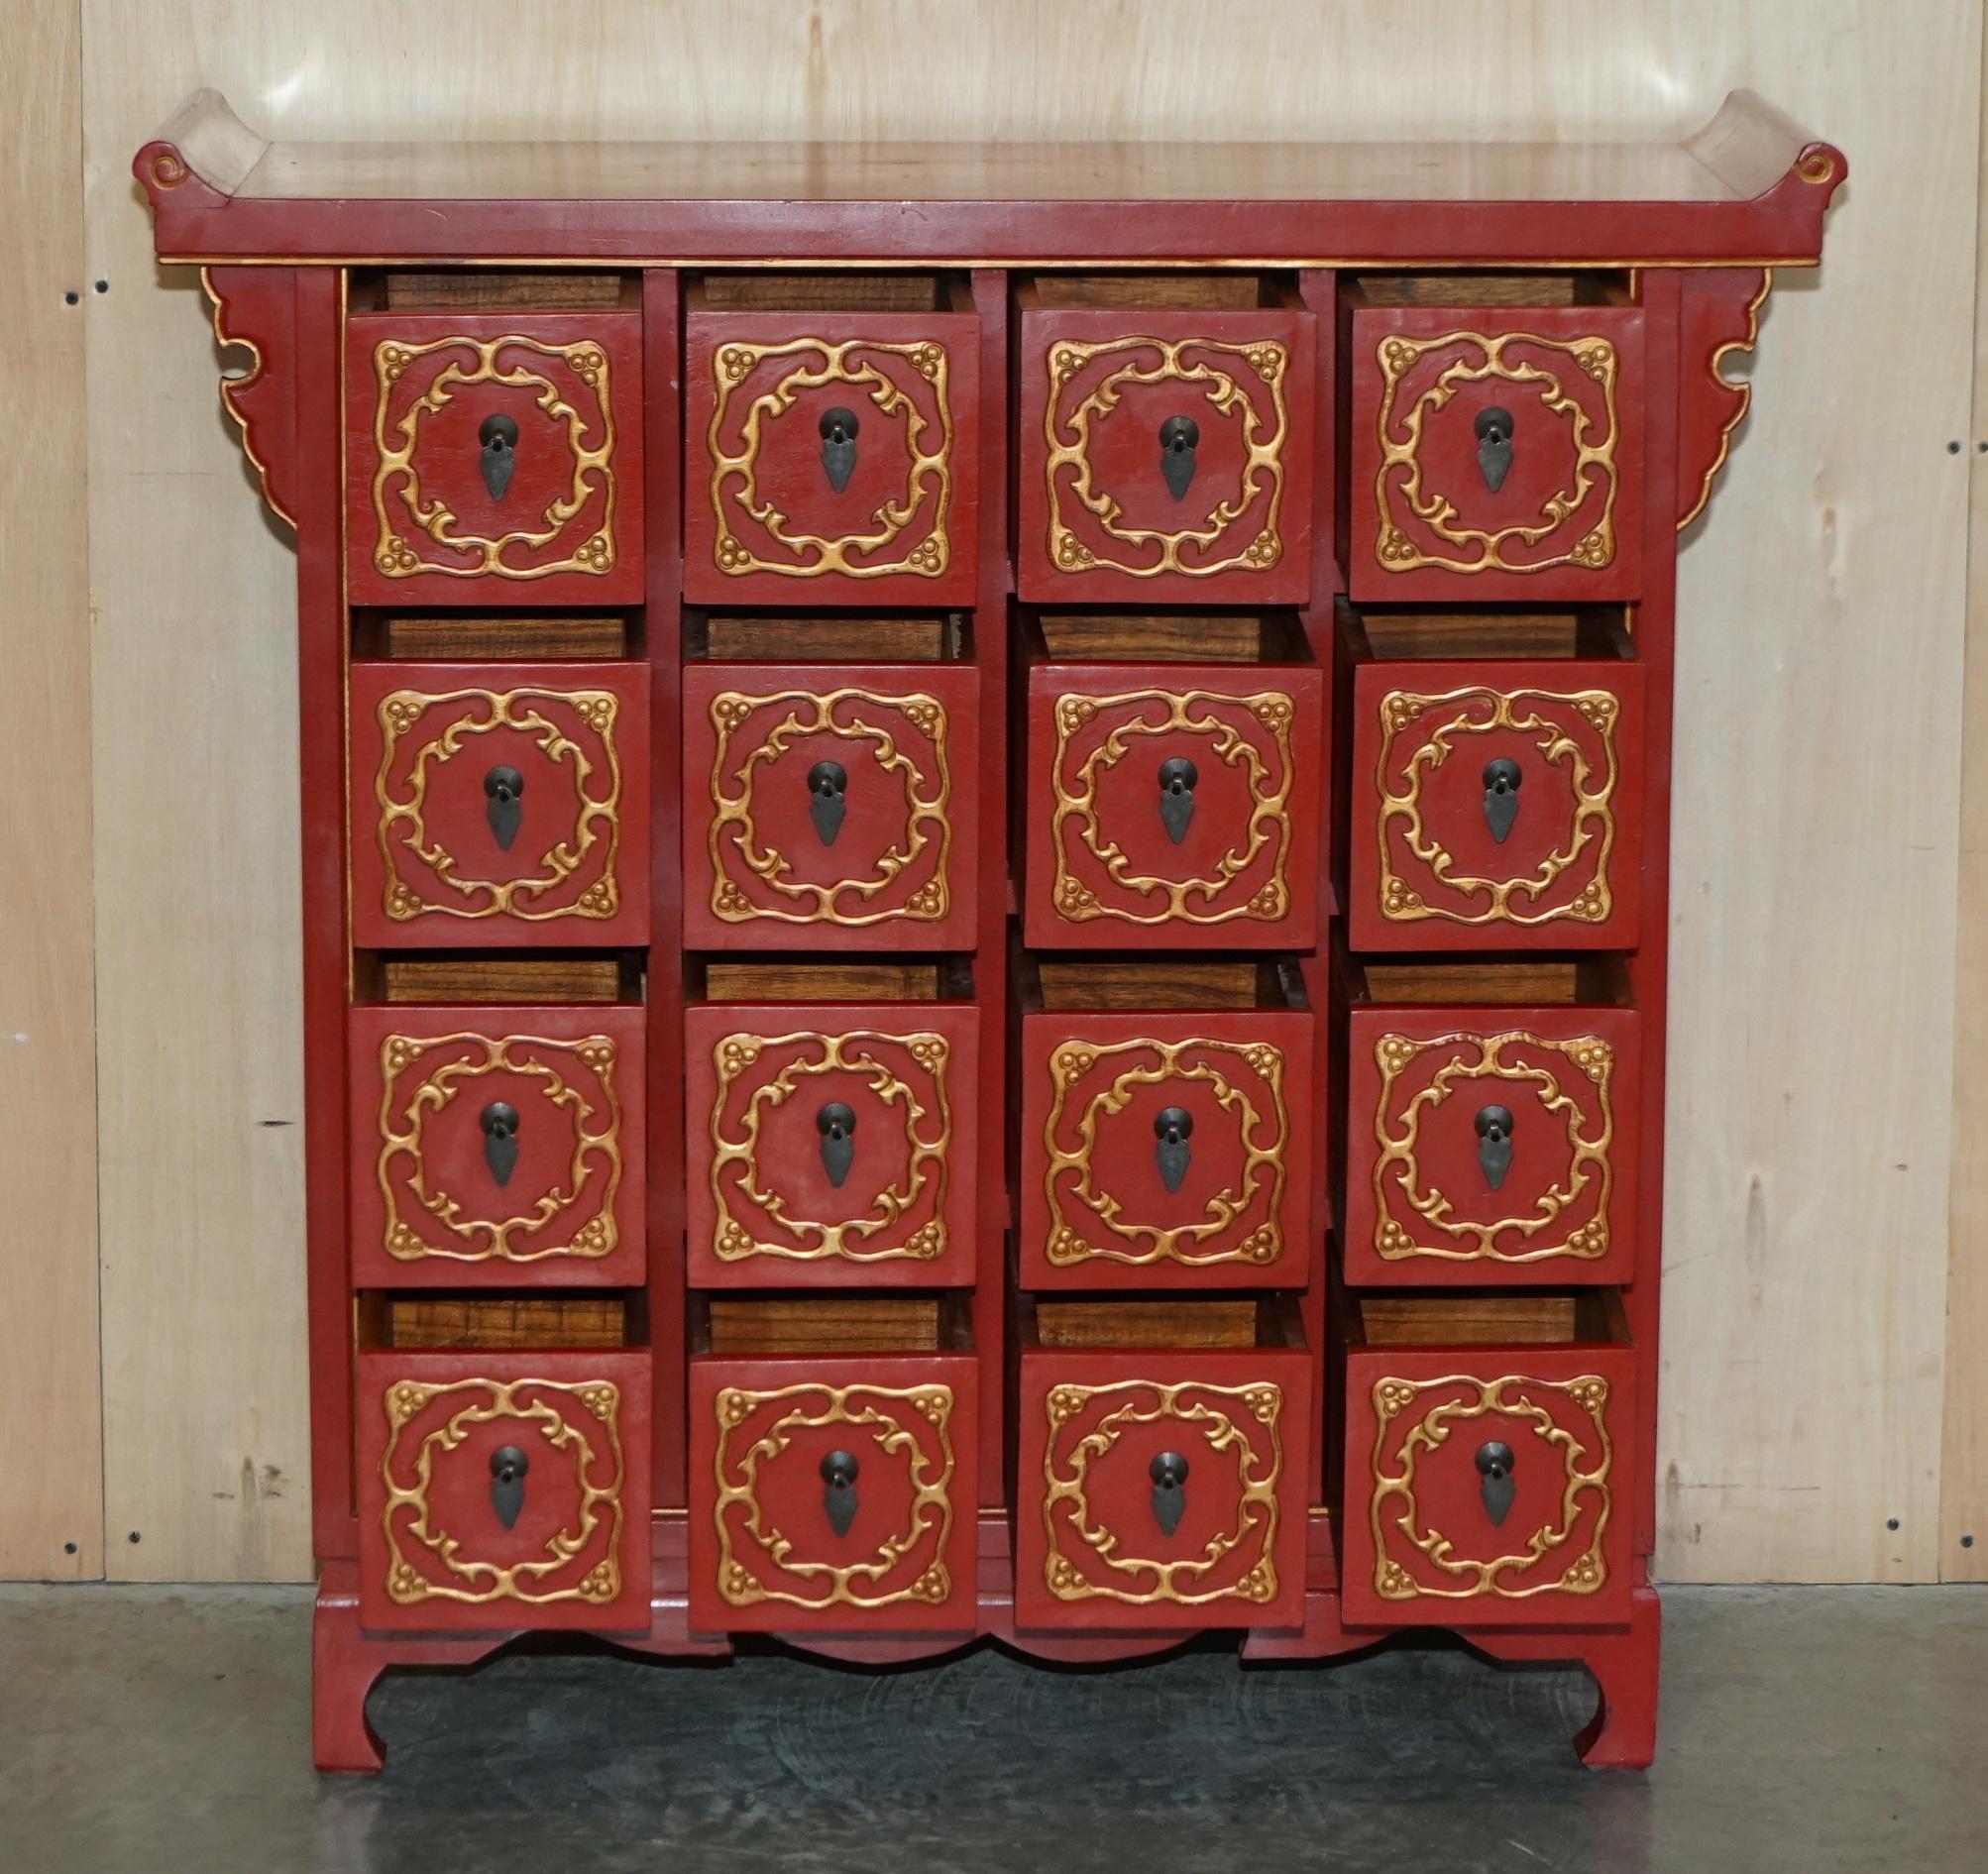 Rare Oriental Chinese Export Vintage Cabinet Lots of Drawers for Fine Teas For Sale 9